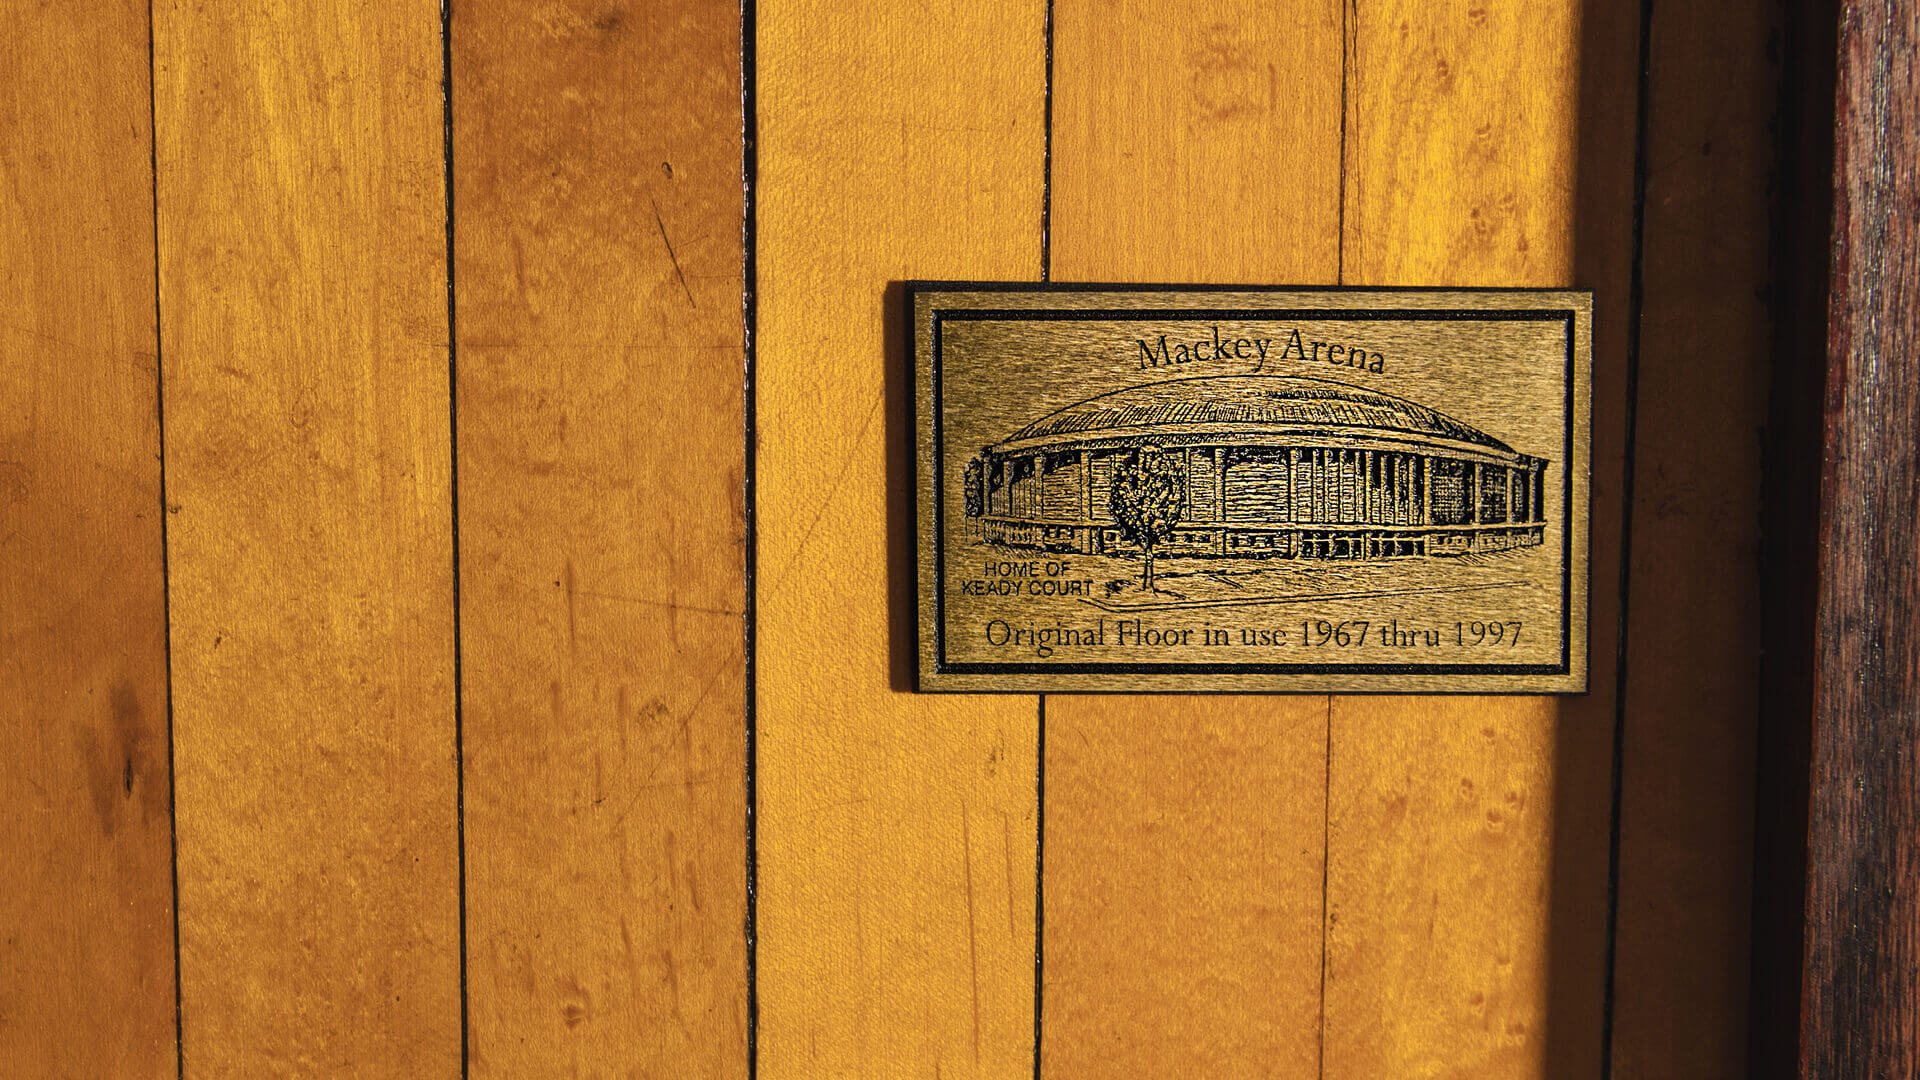 A Mackey Arena label on Don Hunt’s section of flooring from the basketball court